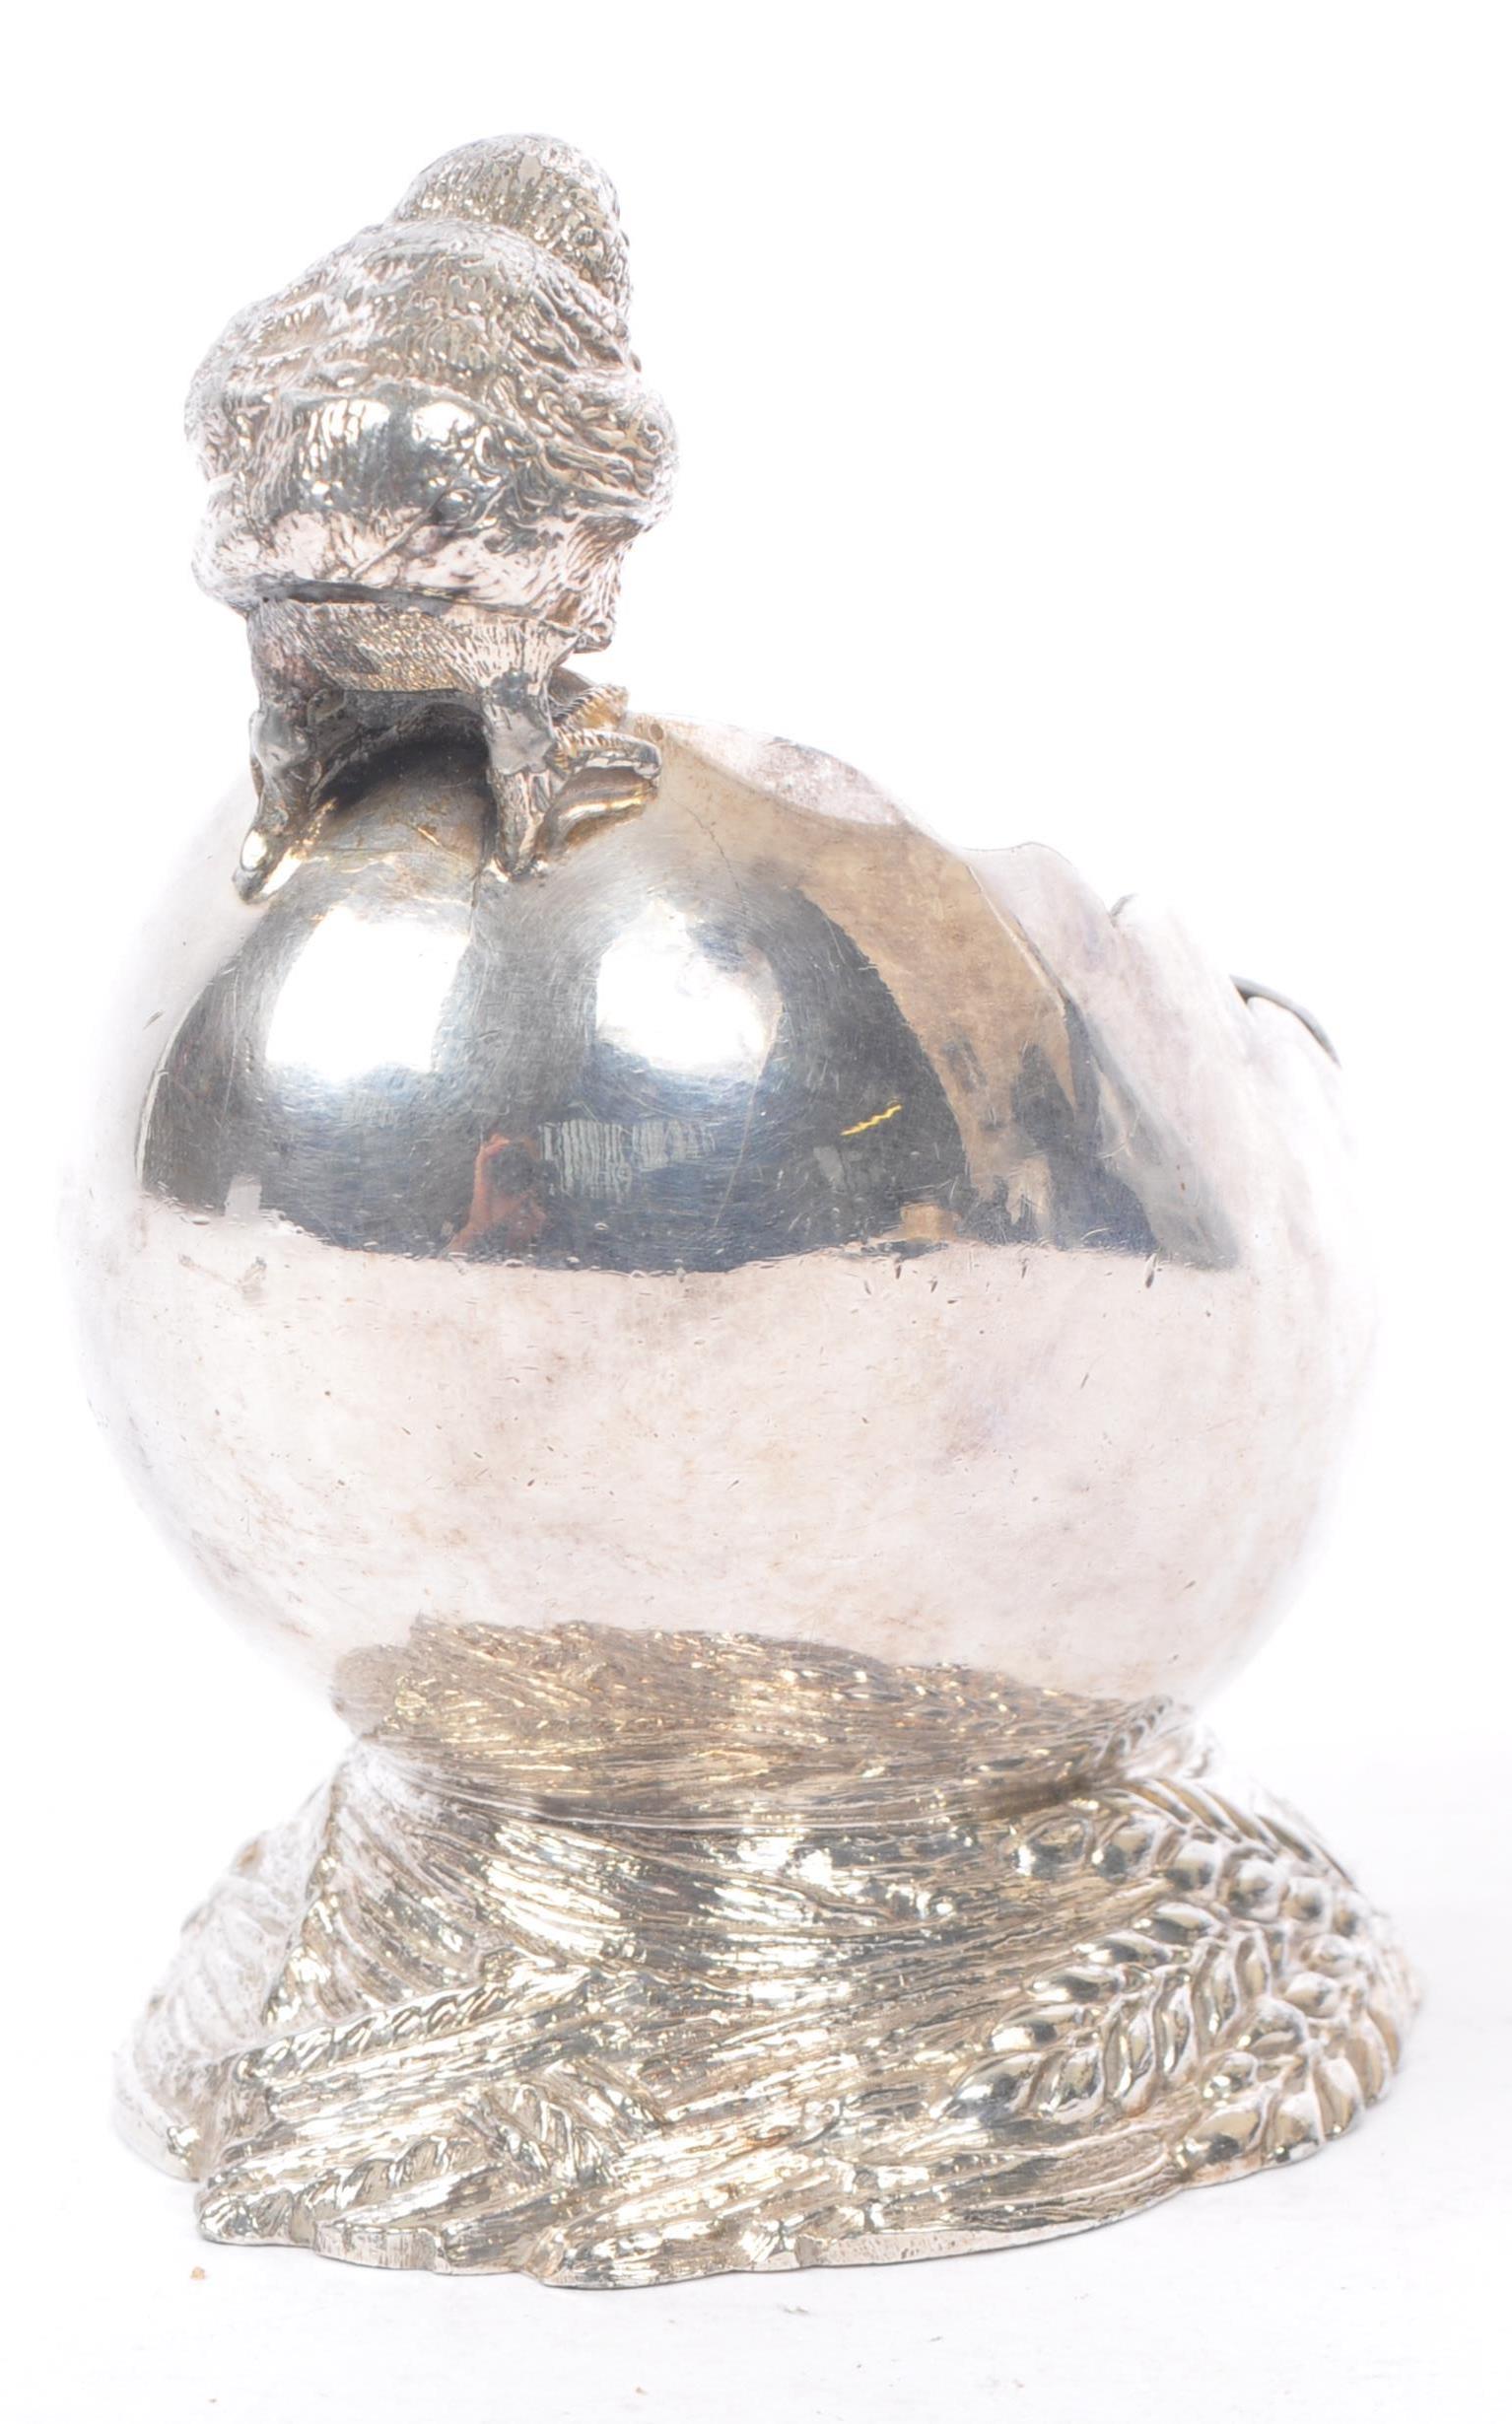 ART DECO SILVER PLATE CHICK AND EGG SALT CELLAR - Image 4 of 7